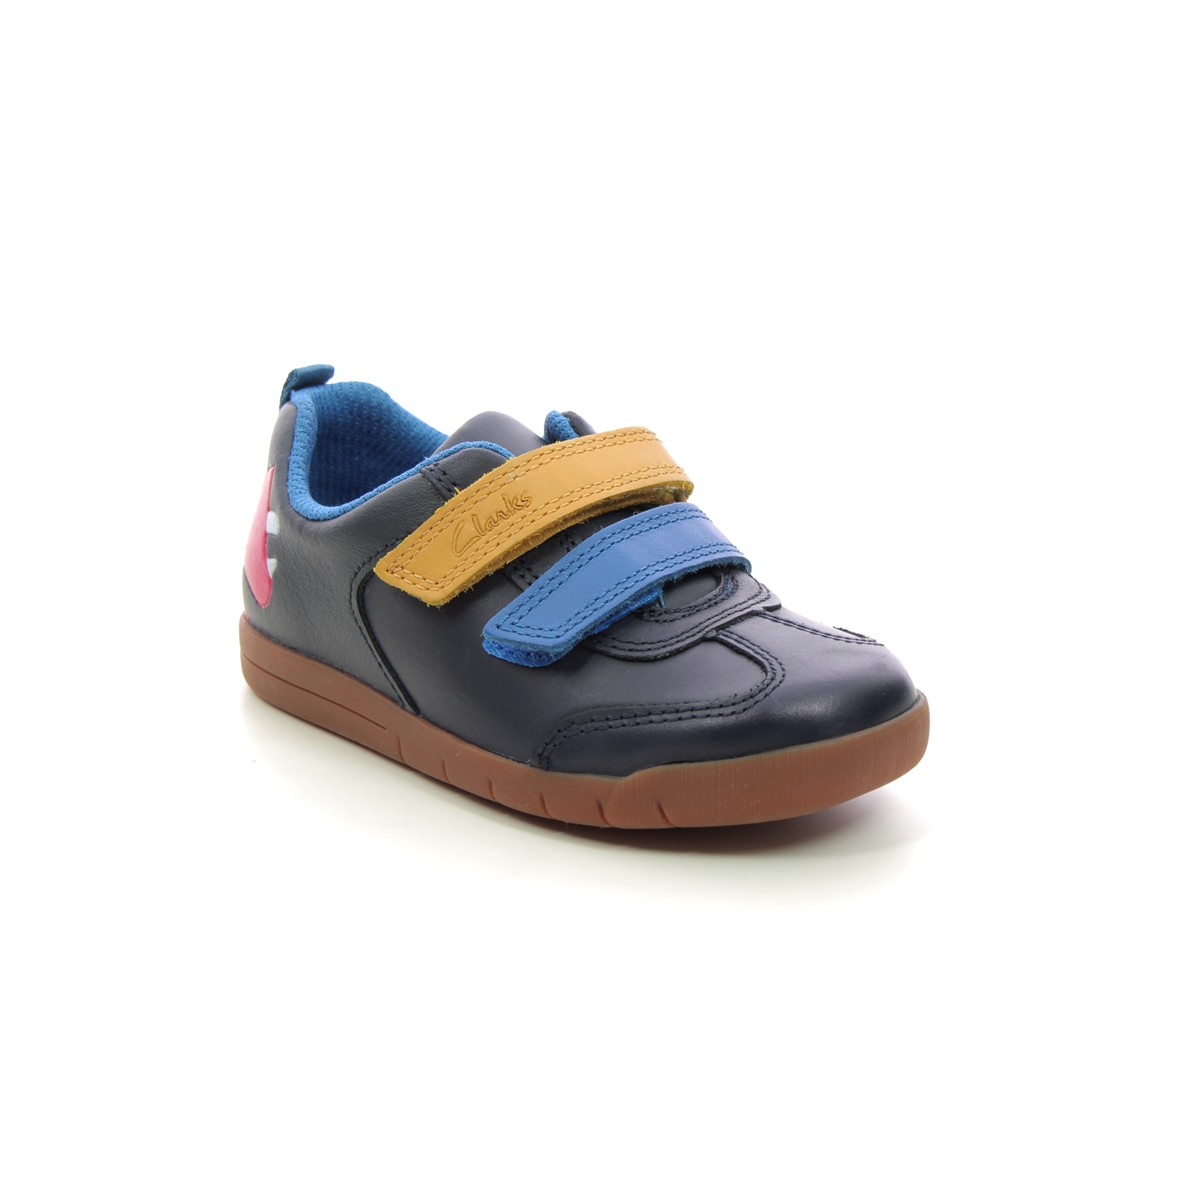 Clarks Den Play T Navy Leather Kids Boys Toddler Shoes 715906F In Size 5 In Plain Navy Leather F Width Fitting Regular Fit For kids